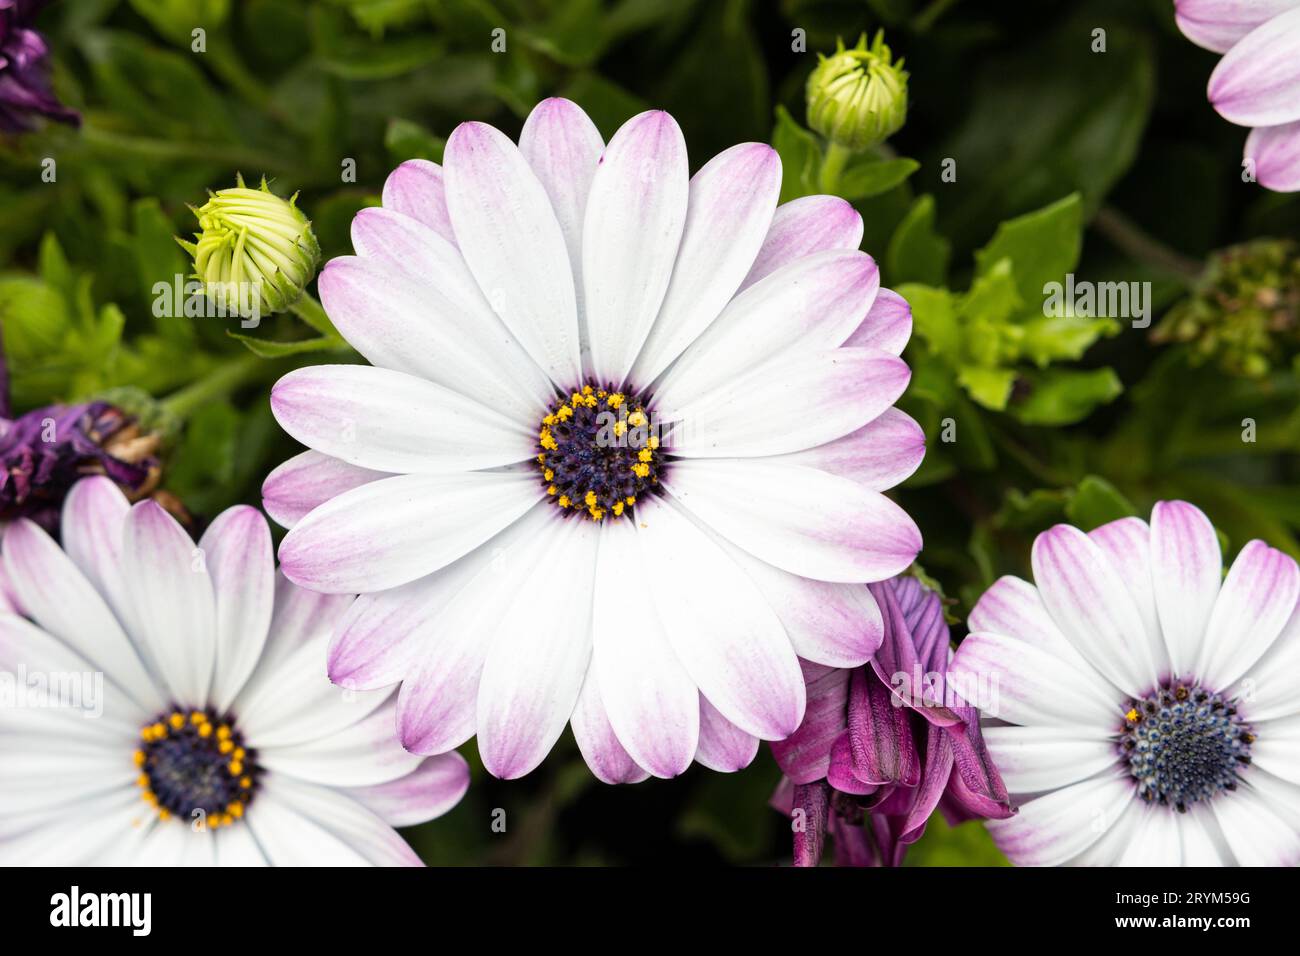 White and purple African Daisy Flower growing on garden. Dimorphotheca pluvialis Stock Photo